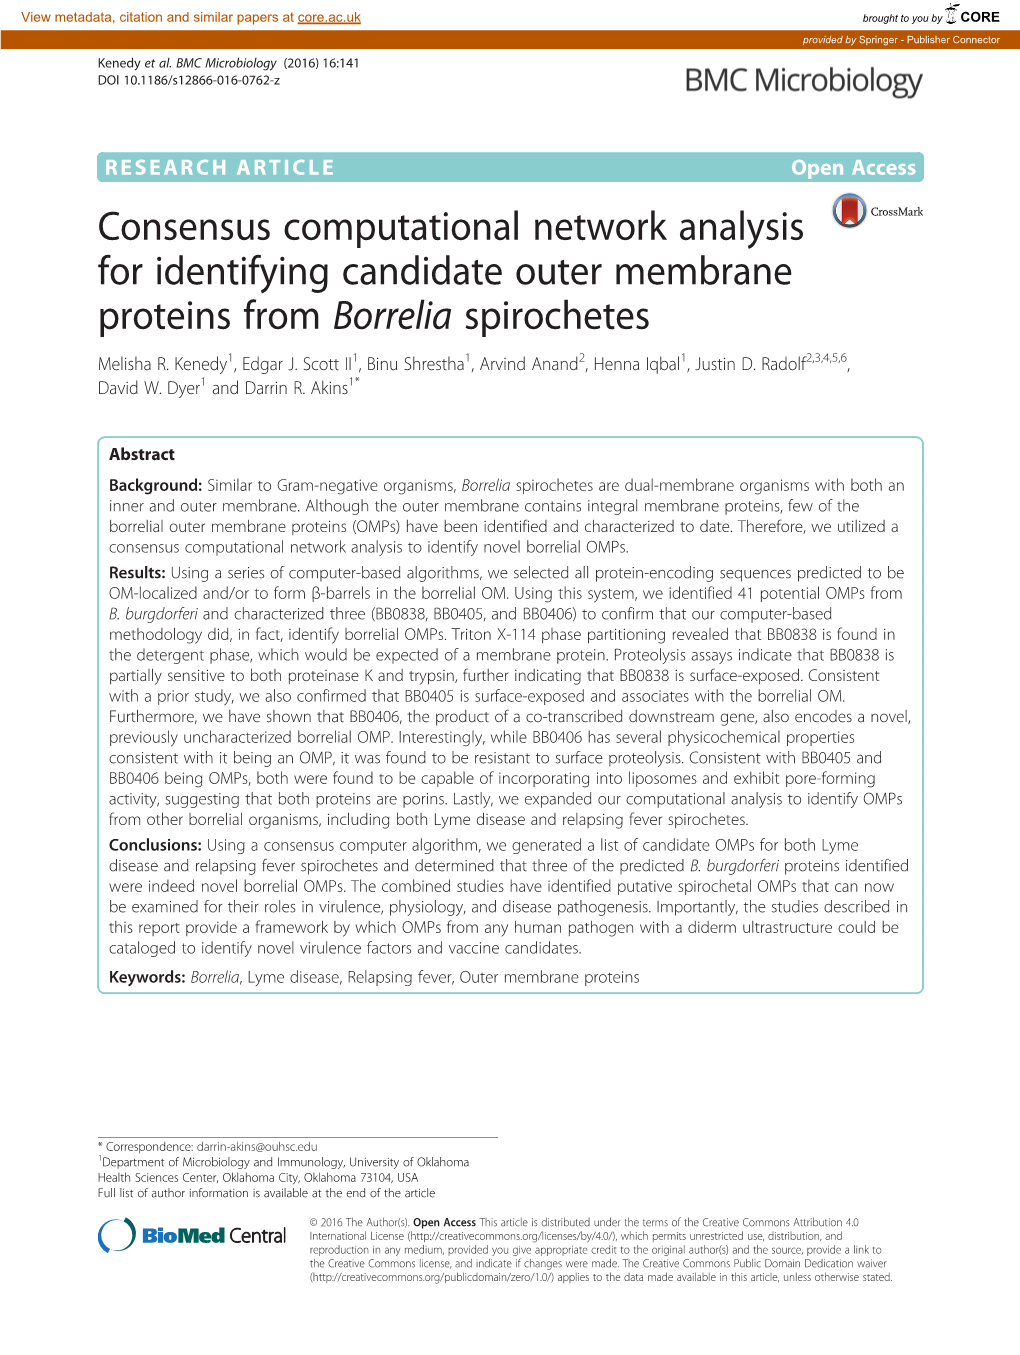 Consensus Computational Network Analysis for Identifying Candidate Outer Membrane Proteins from Borrelia Spirochetes Melisha R